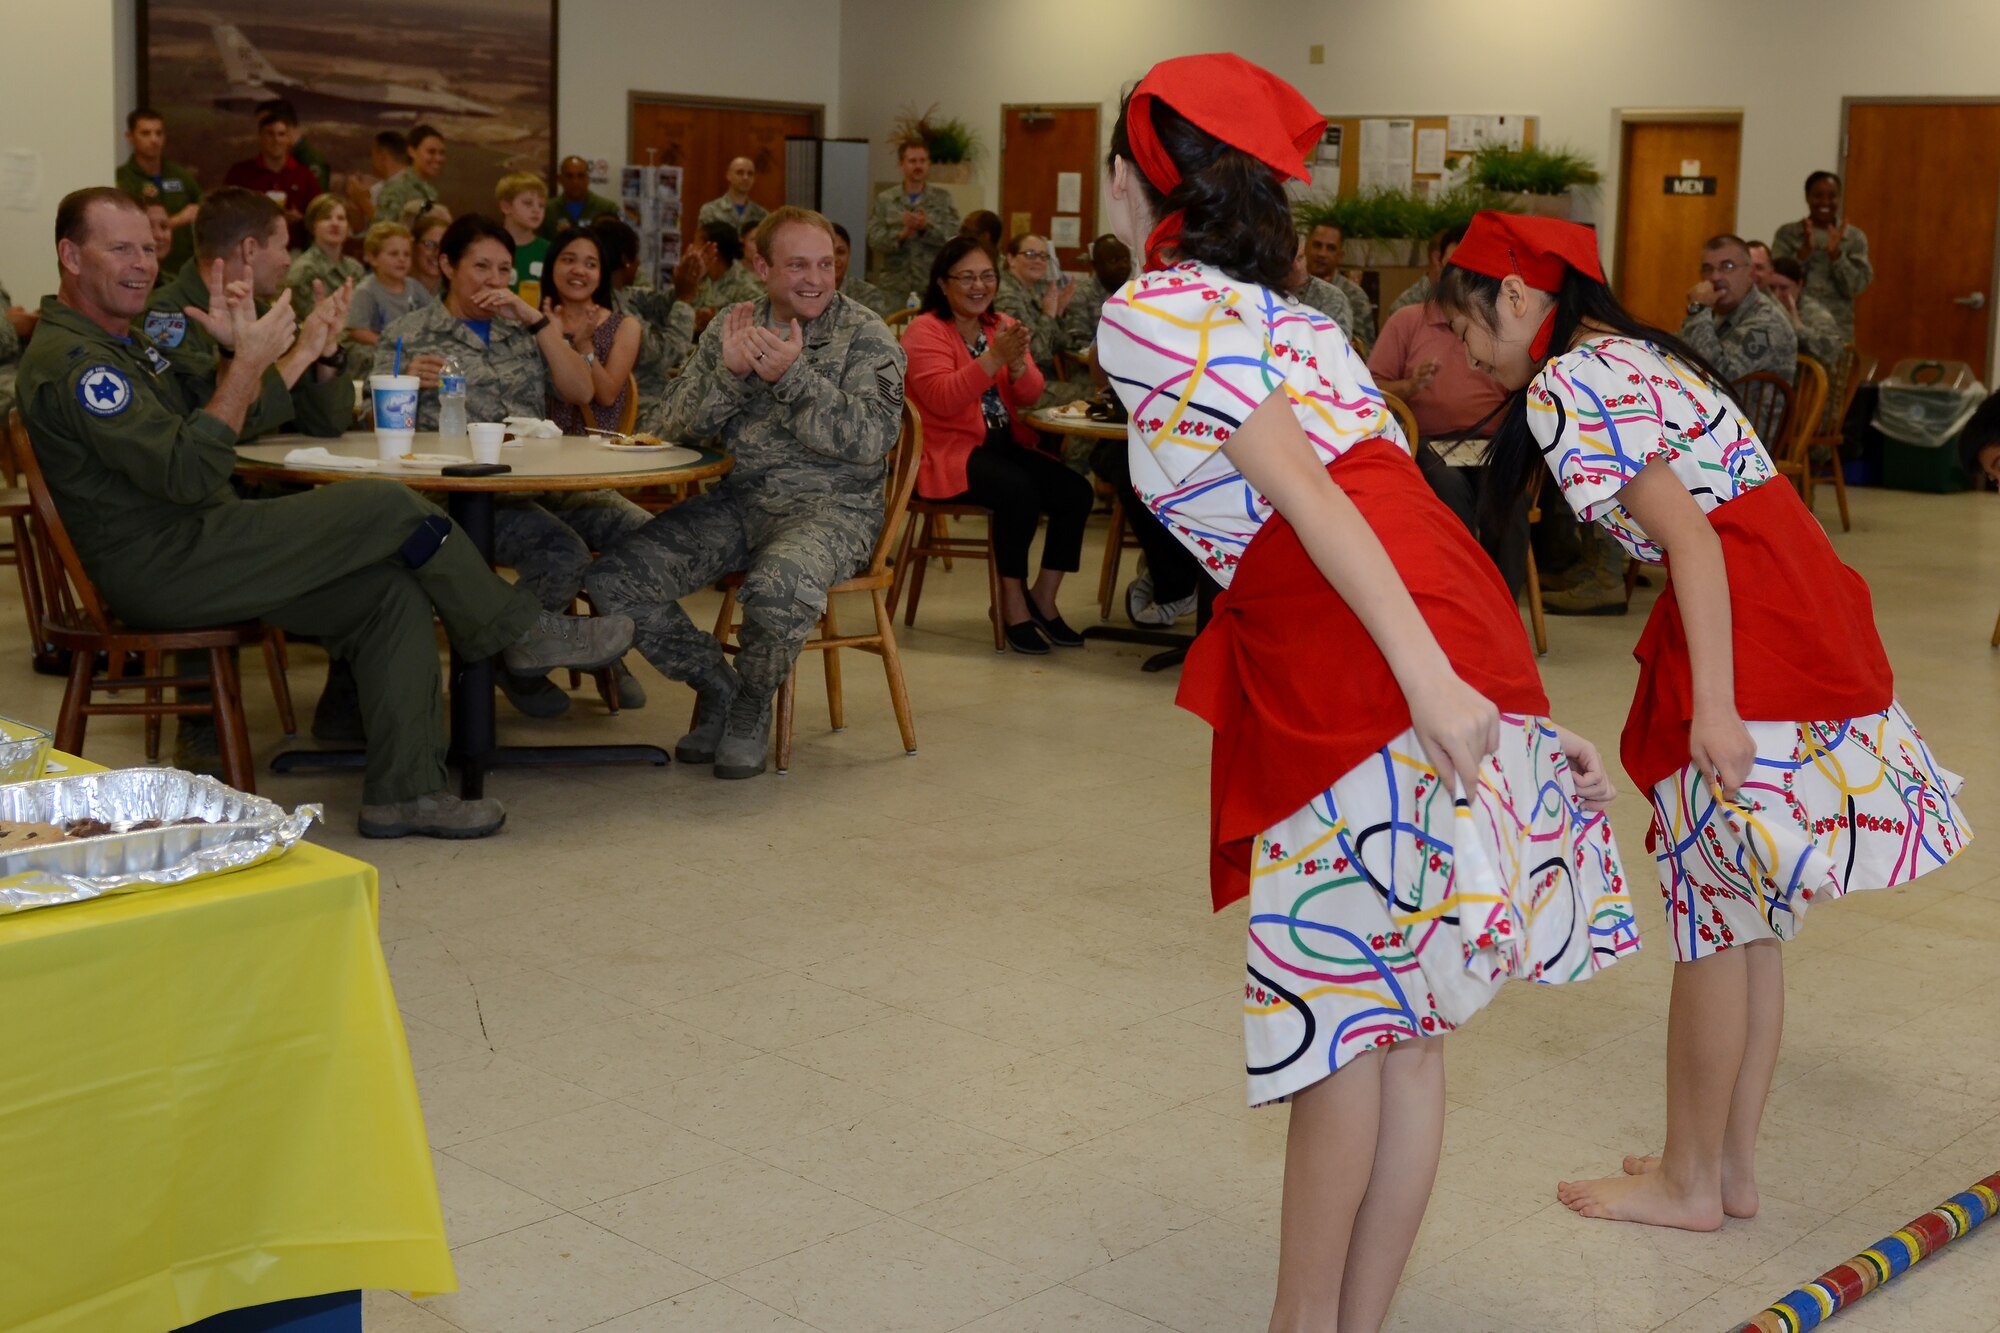 The teen and youth dance troop from the Filipino-American Association of Greater Columbia demonstrates the Filipino-originated Tinikling Dance during “A Taste of McEntire” diversity day celebration at McEntire Joint National Guard Base, S.C., Nov. 7, 2015. Diversity Day combines the Department of Defense's monthly diversity programs into a one day event for guardsmen to learn about other cultures and to celebrate diversity. (U.S. Air National Guard photo by Airman 1st Class Ashleigh Pavelek/RELEASED)